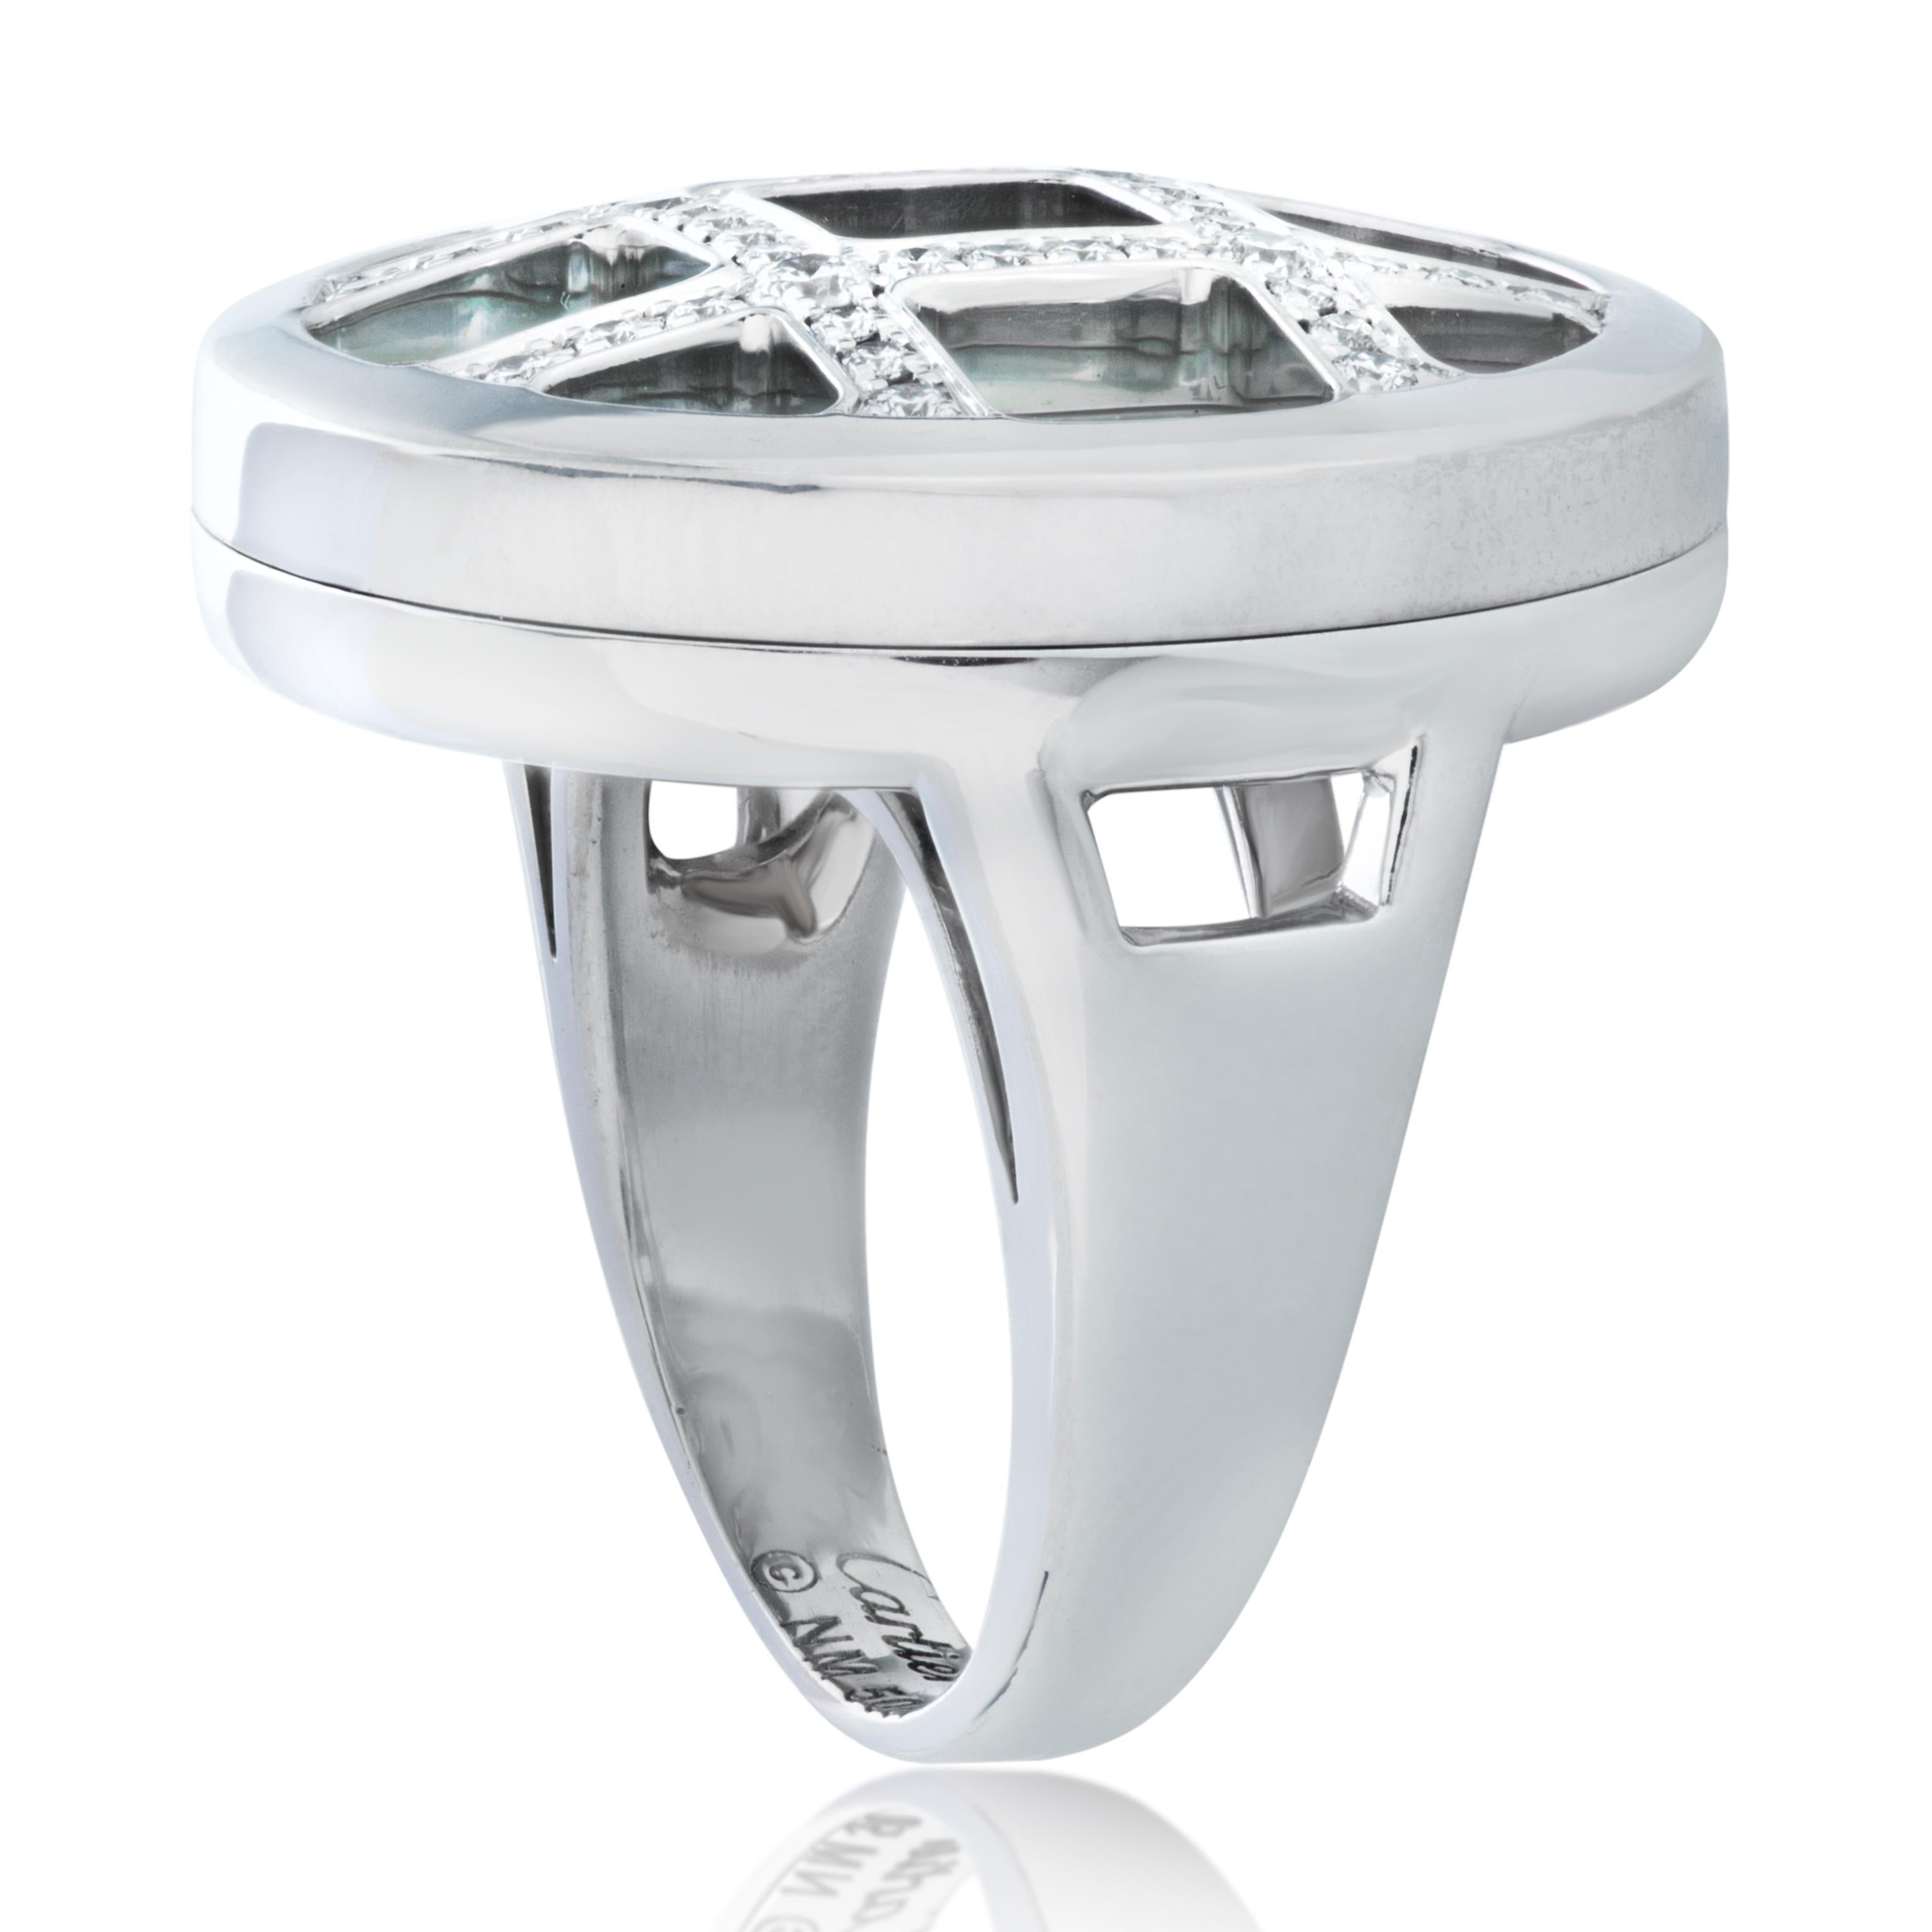 Cartier diamond and mother of pearl Pasha ring in 18k white gold.

This ring features 44 round brilliant cut diamonds with F-G color and VS clarity set in a lattice pattern over mother of pearl.  

The top of the ring measures 24mm in